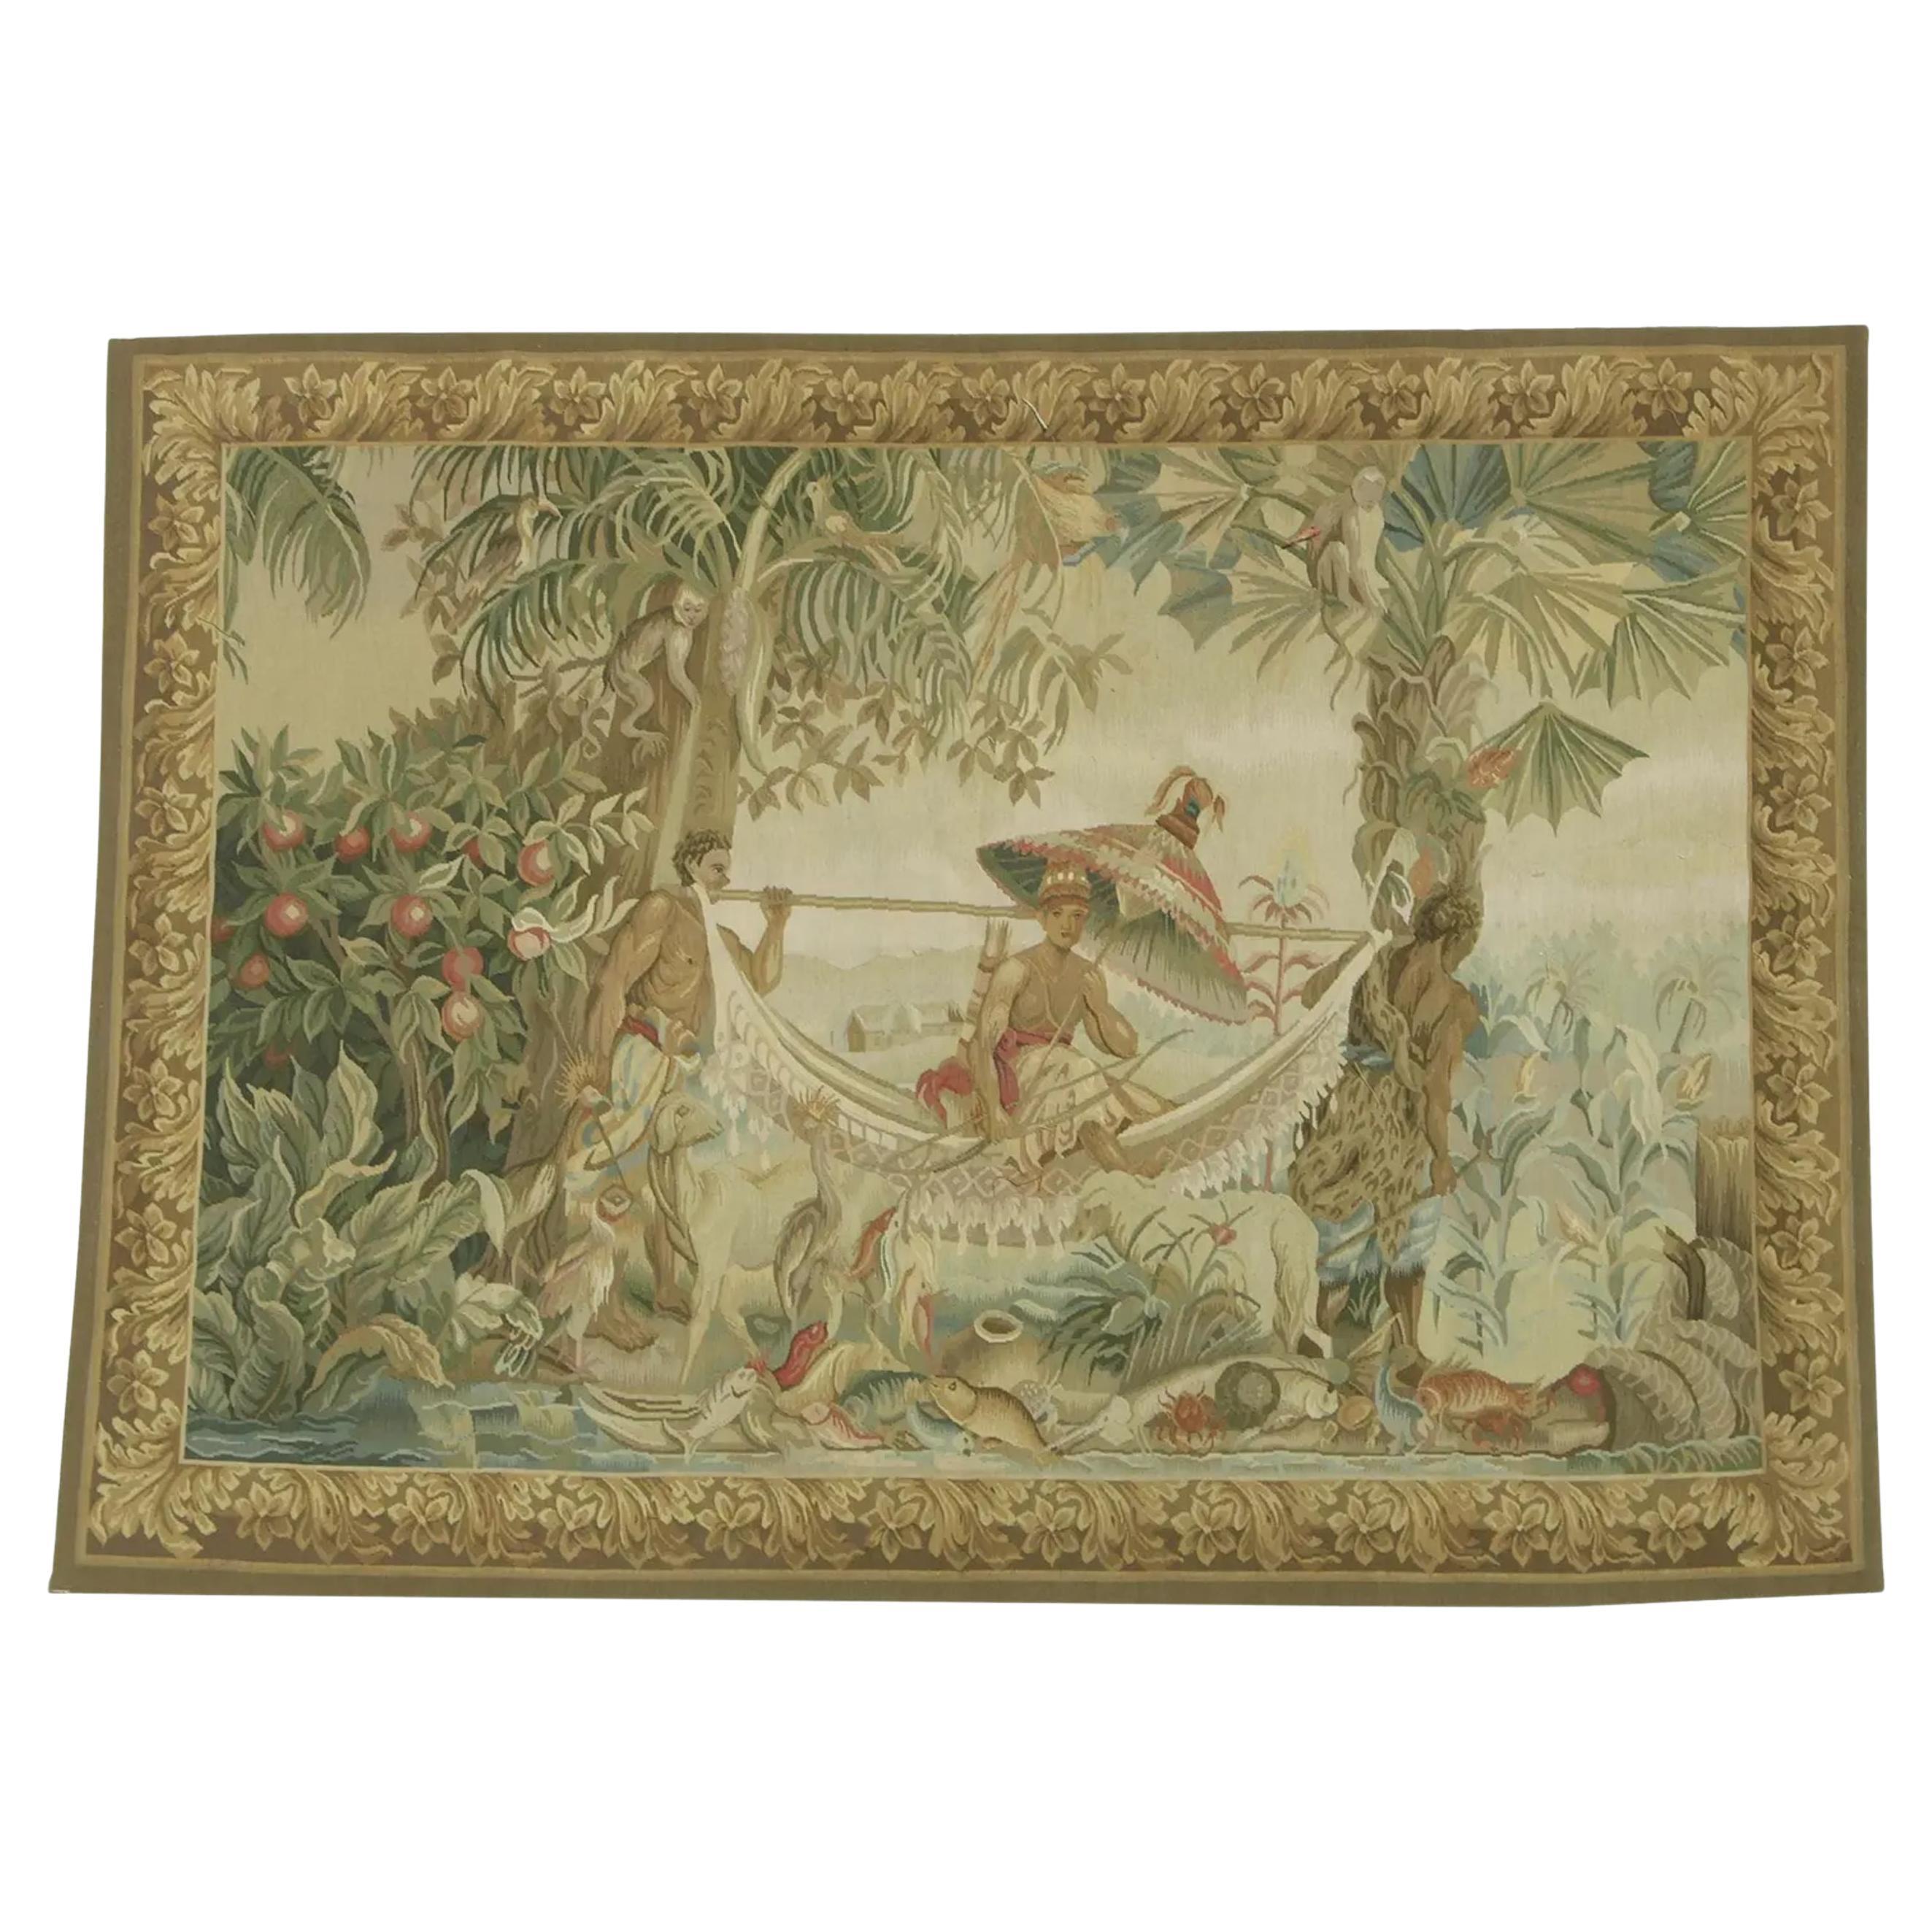 Vintage Tapestry Depicting Royalty 5.7X4 For Sale